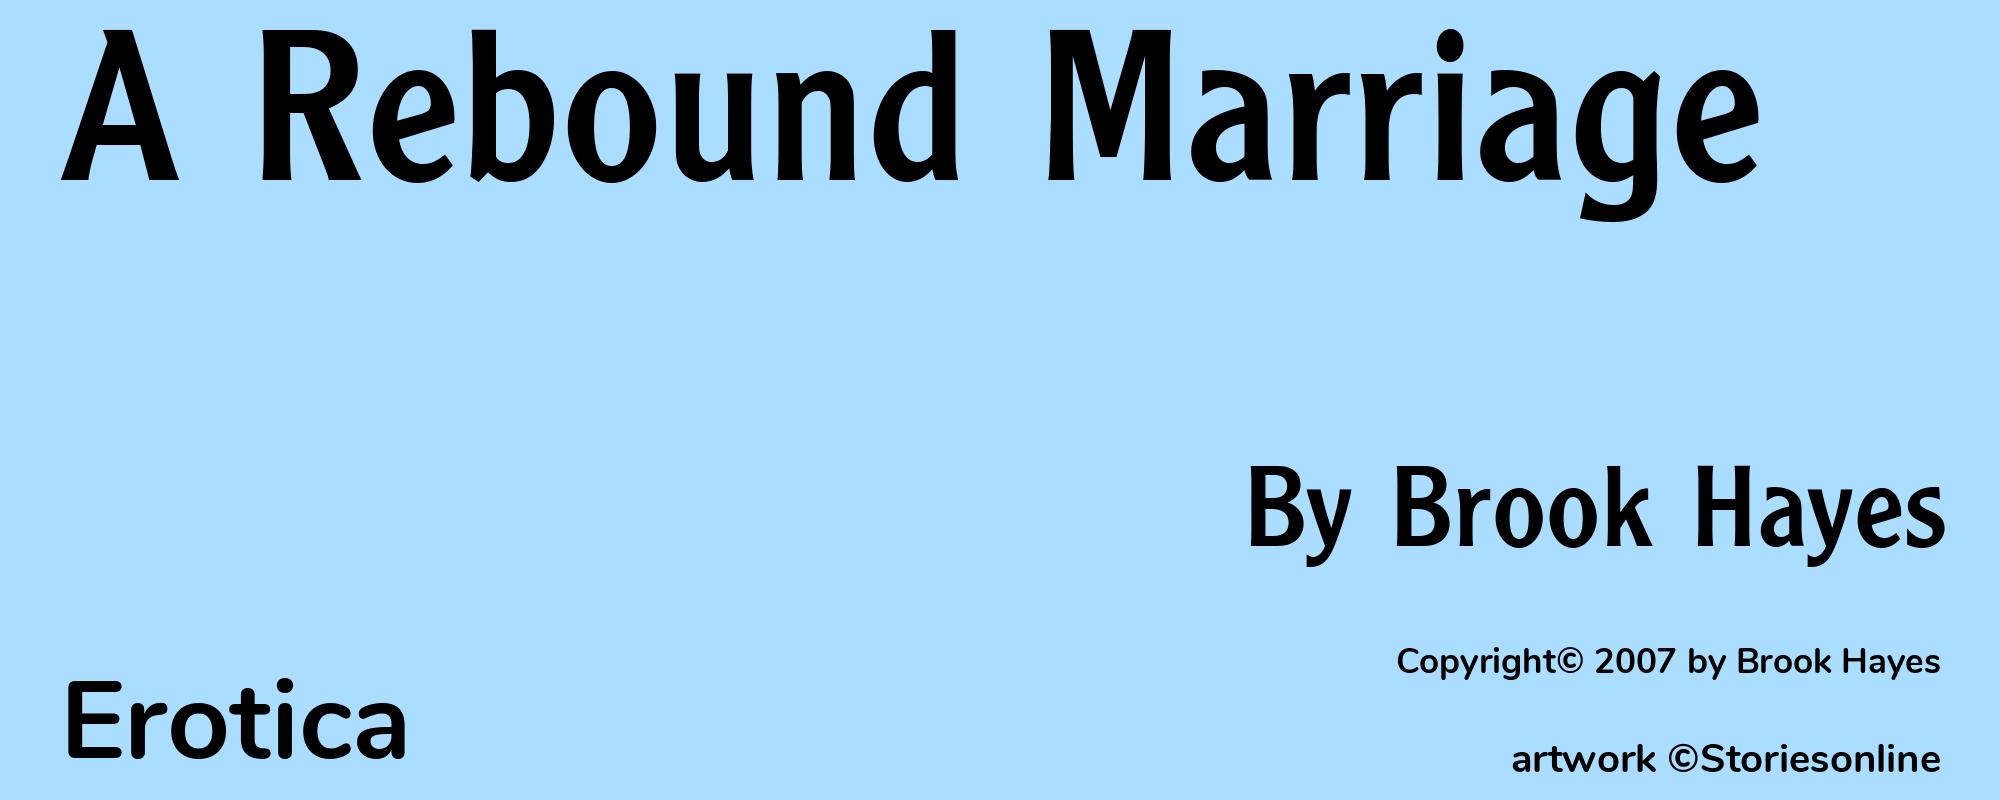 A Rebound Marriage - Cover